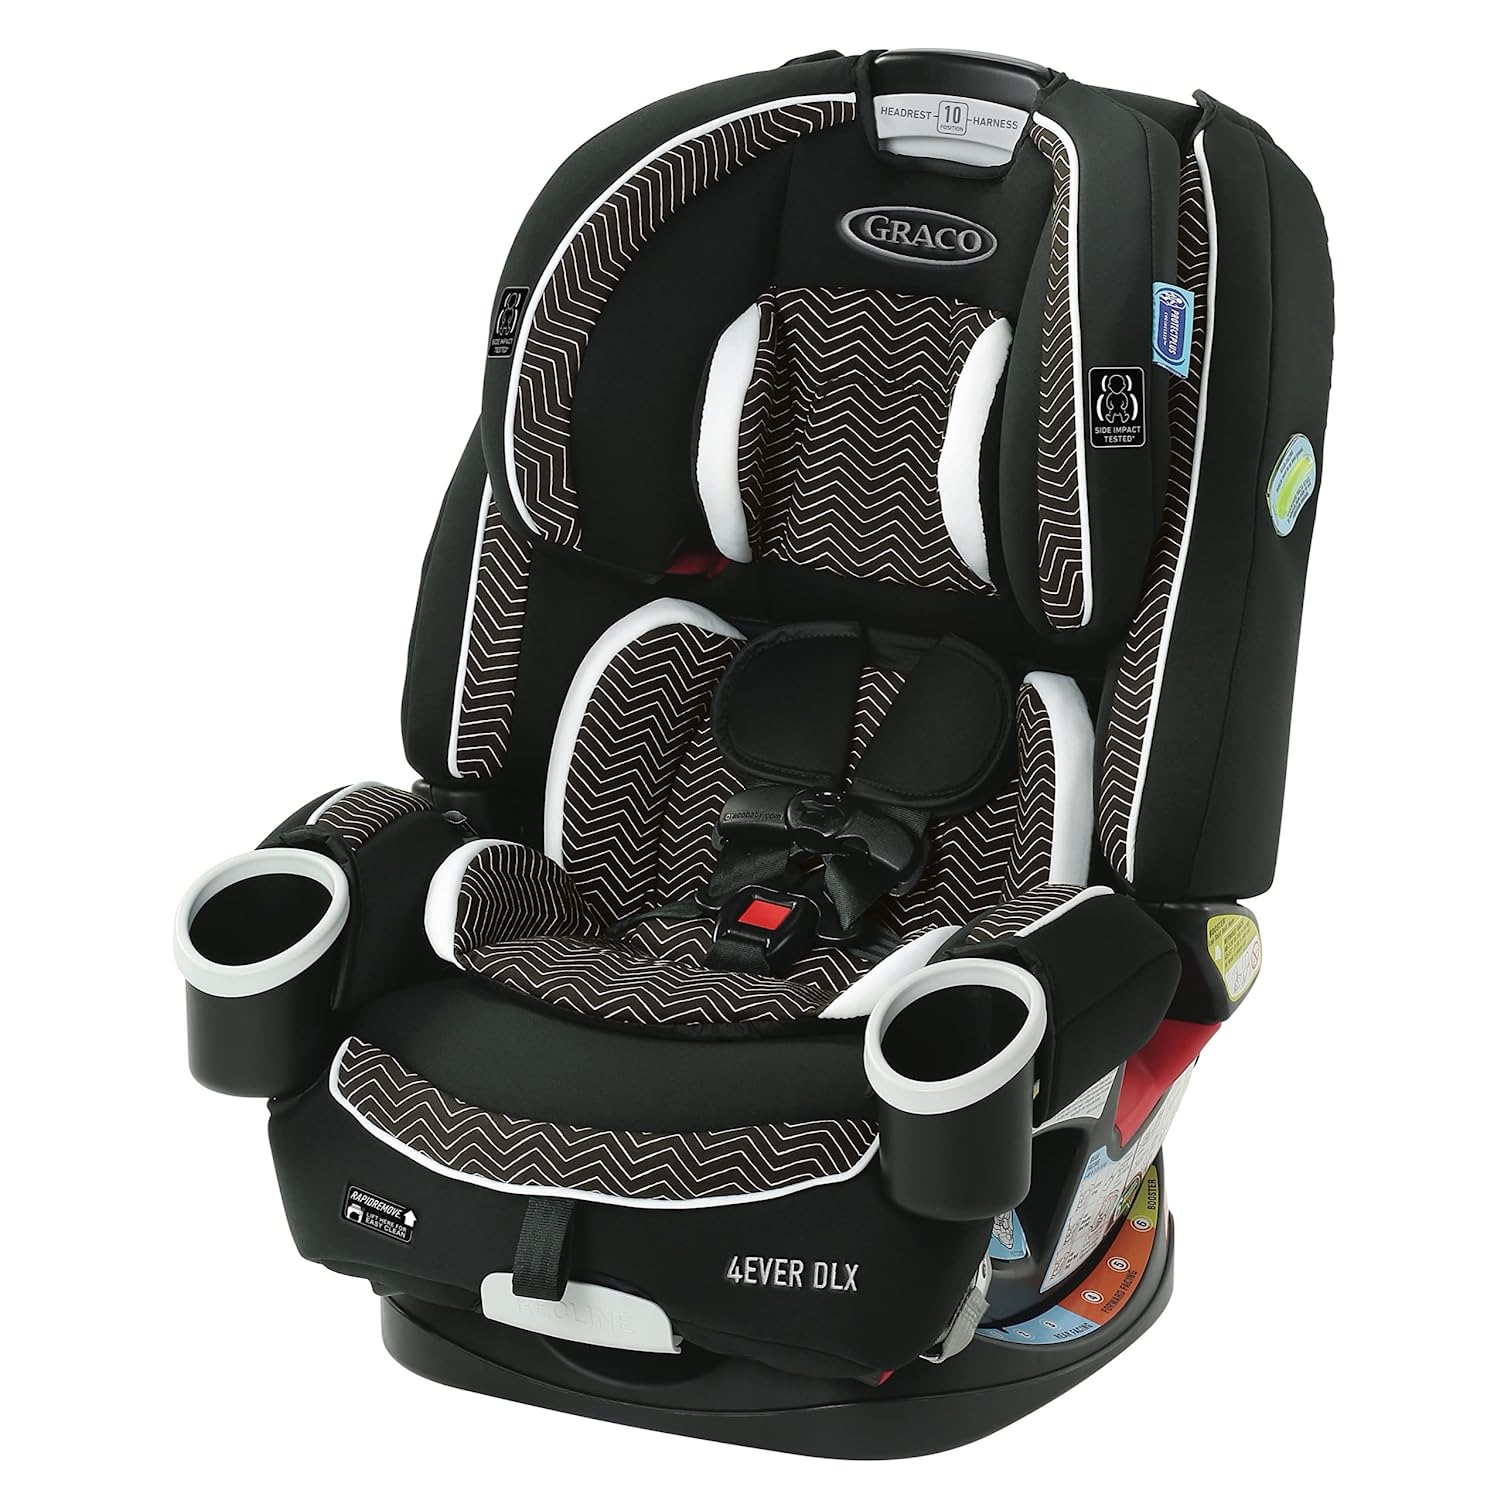 graco-4ever-dlx-4-in-1-car-seat-infant-to-toddler-car-seat